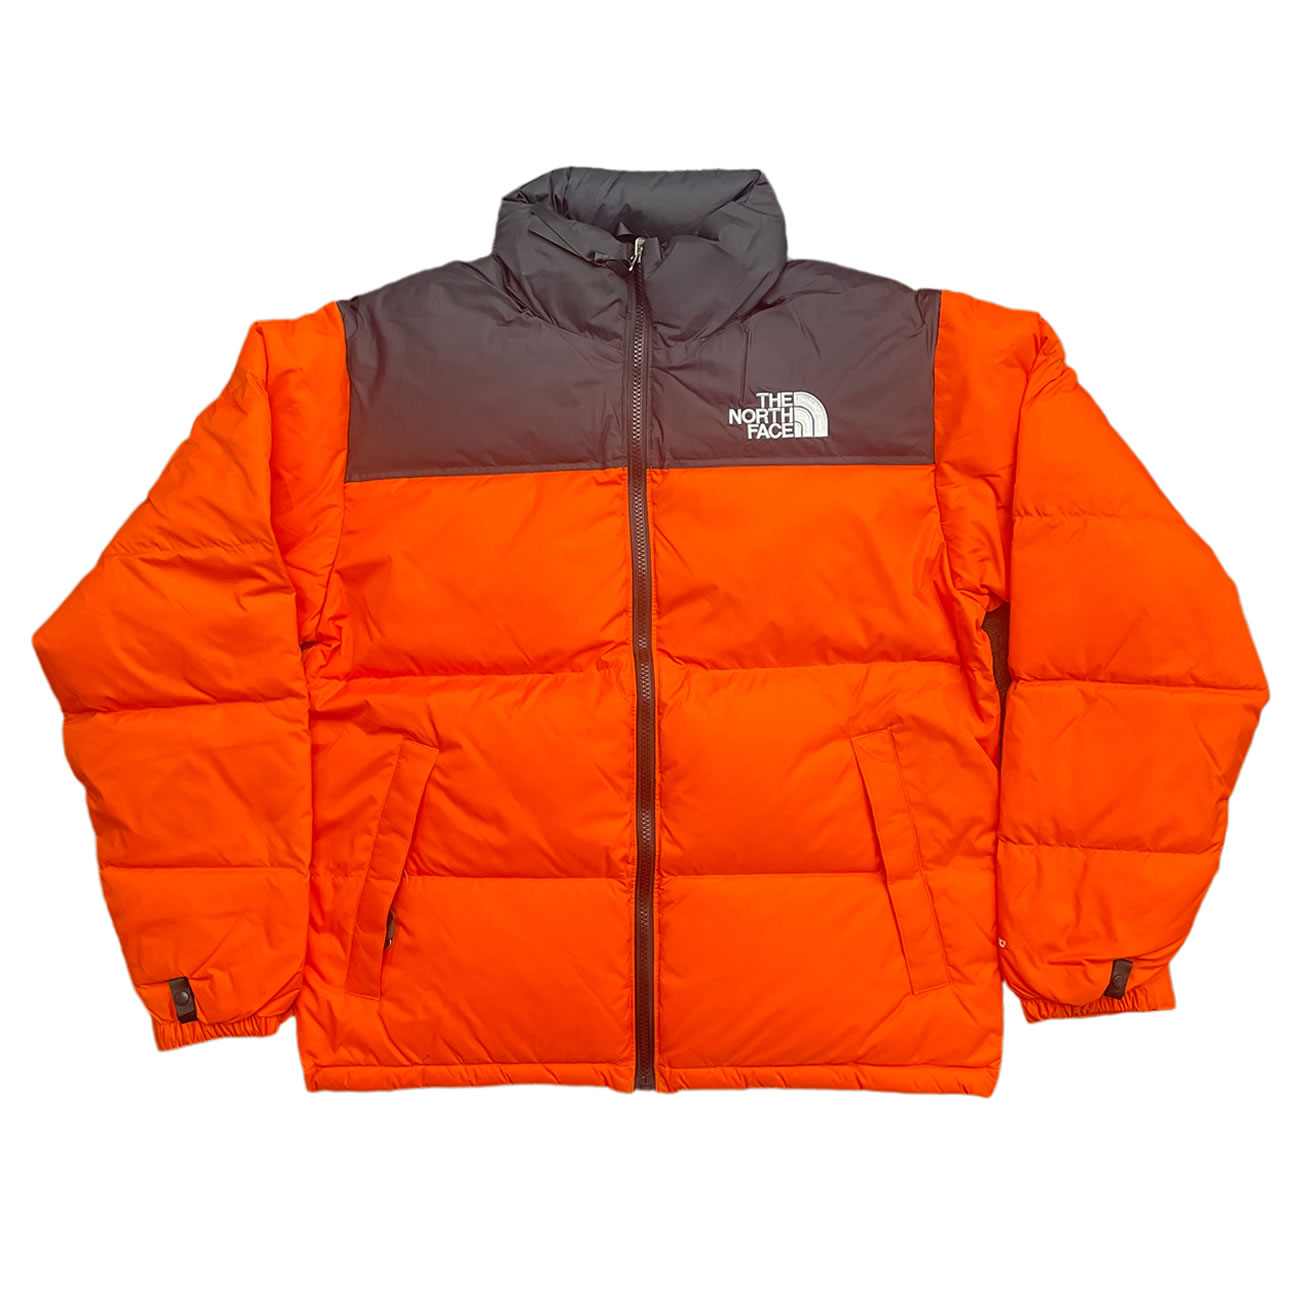 The North Face 1996 Retro Nuptse Packable Jacket Fw21 (19) - newkick.org